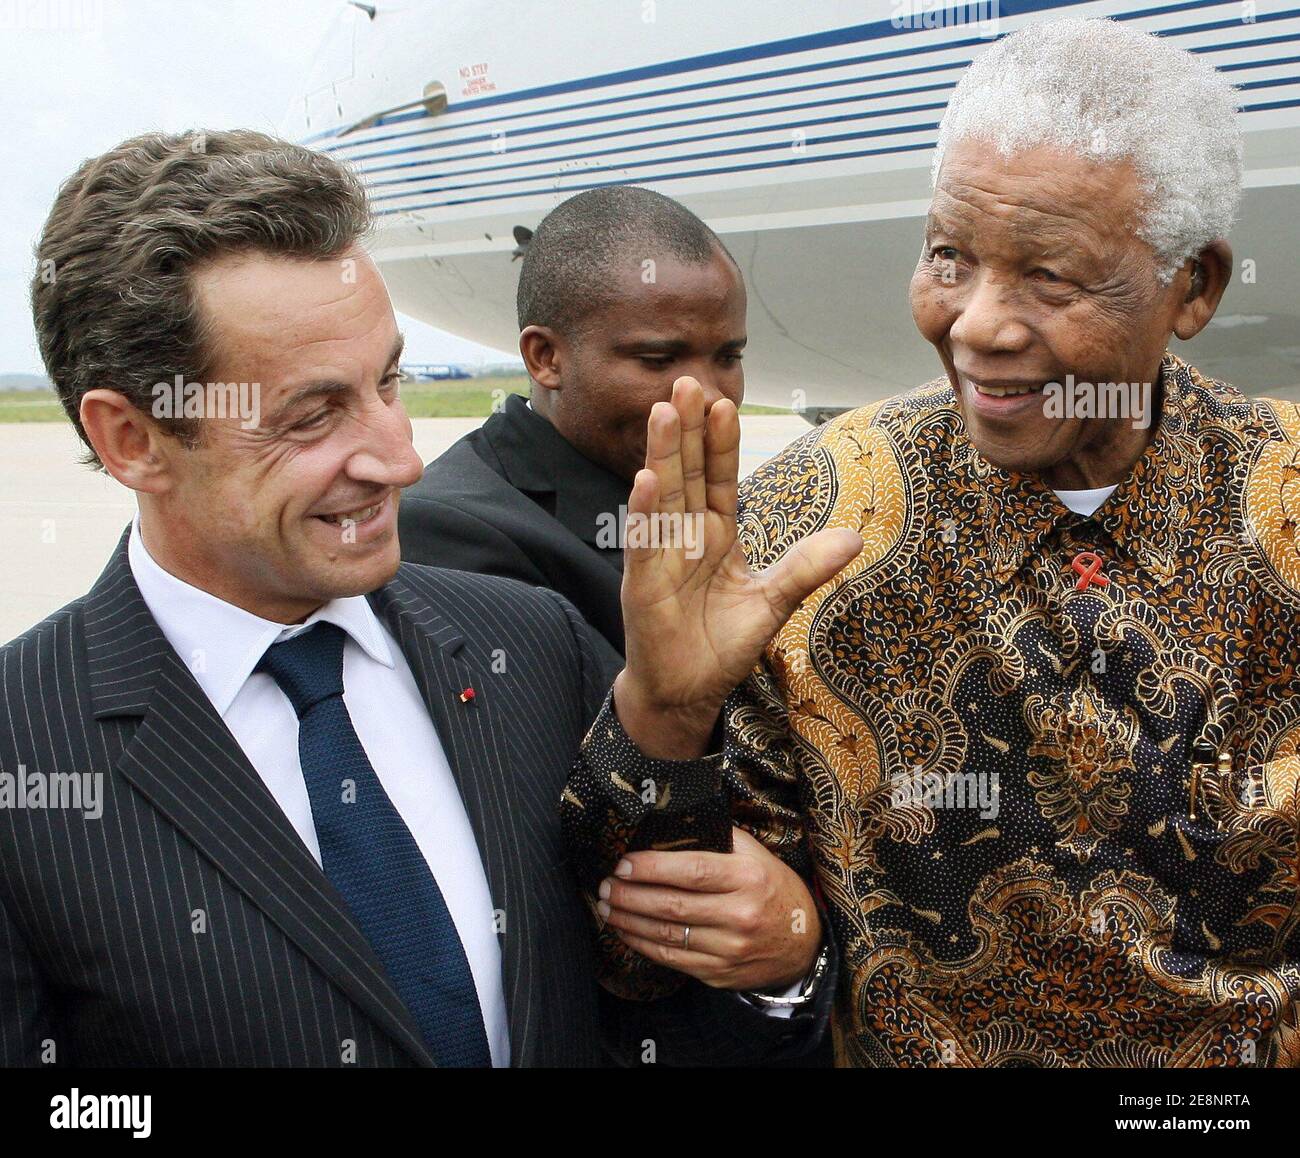 President Nicolas Sarkozy (l) welcomes former South African president Nelson Mandela upon his arrival at Orly airport, near Paris, France on September 3, 2007. The 89-year-old Nobel Peace Prize winner Mandela spent 27 years in prison before being freed in 1990, going on to become South Africa's first black leader in 1994 after the fall of apartheid. He received last week a hero's welcome in London, where a statue of him was unveiled opposite the Houses of Parliament. Photo by Thomas Coex/Pool/ABACAPRESS.COM Stock Photo